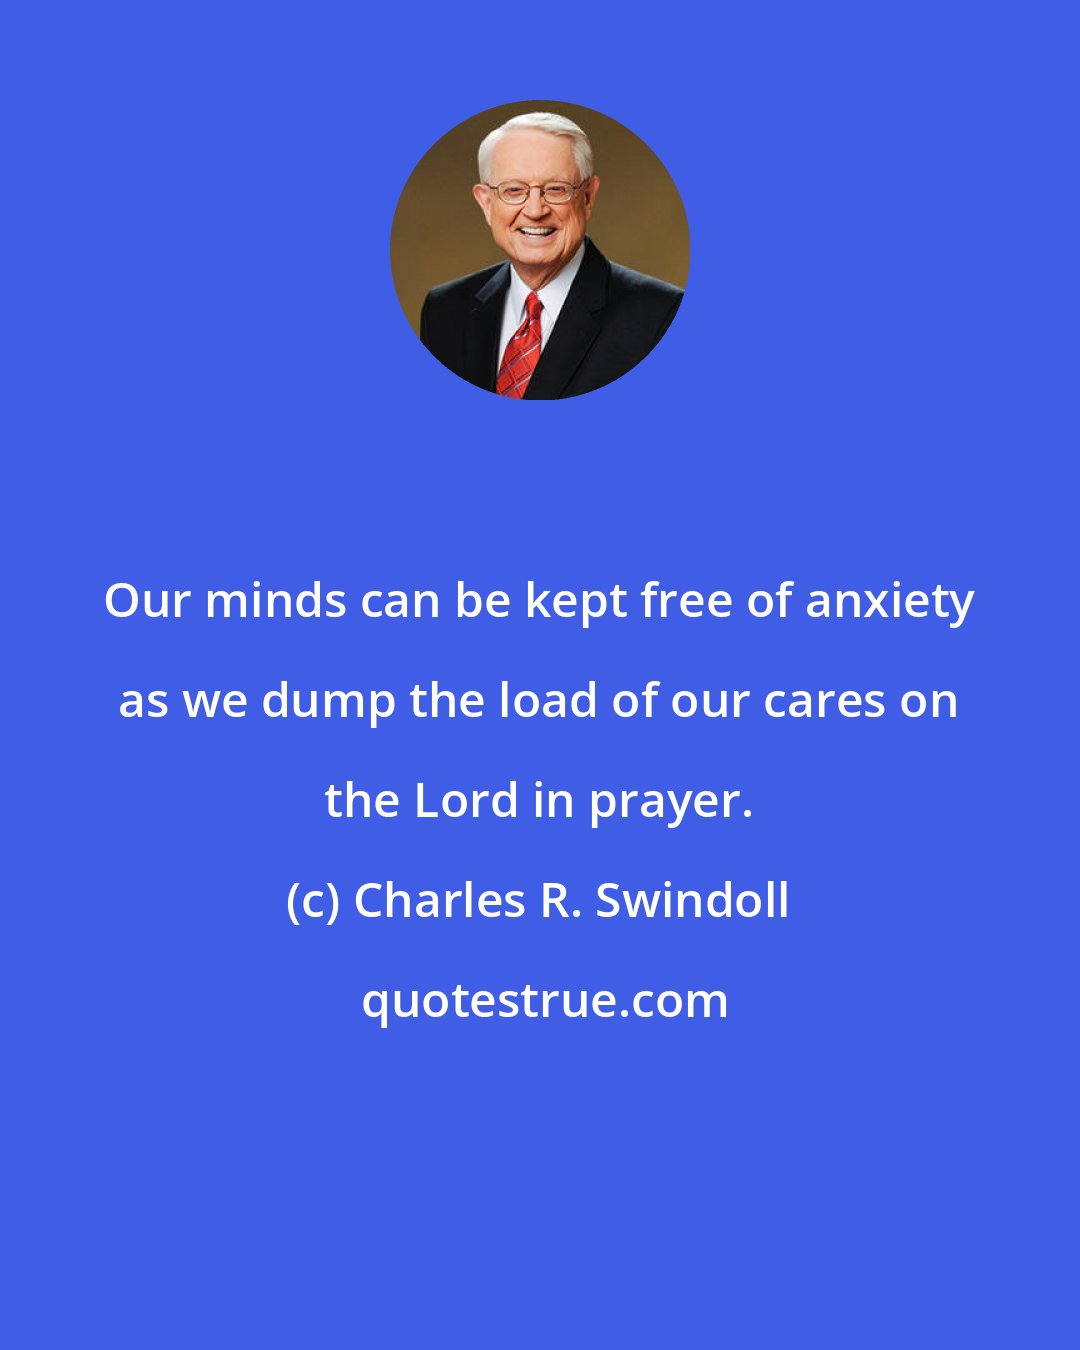 Charles R. Swindoll: Our minds can be kept free of anxiety as we dump the load of our cares on the Lord in prayer.